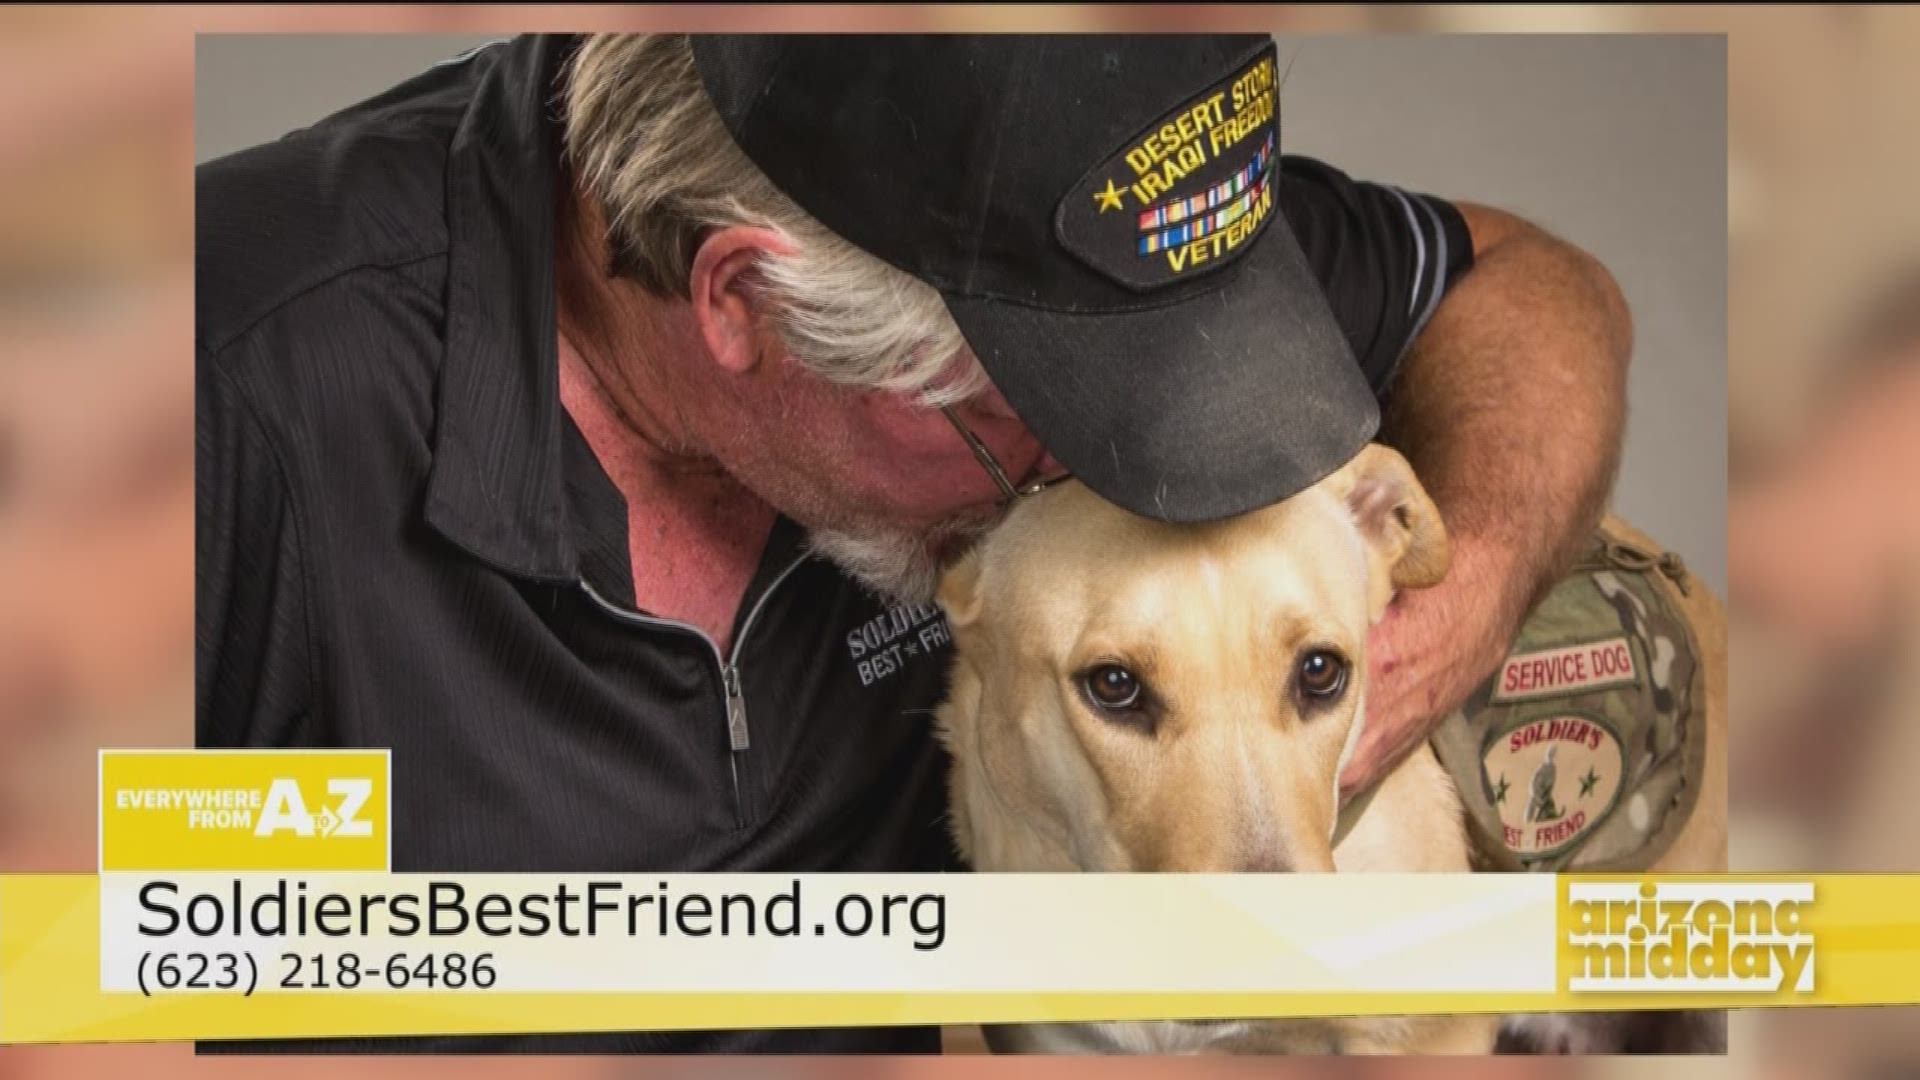 Learn about an amazing program providing service animals to veterans with president of Soldier's Best Friend, Jill Nelson, veteran David Campbell, and his service dog, Caleb.